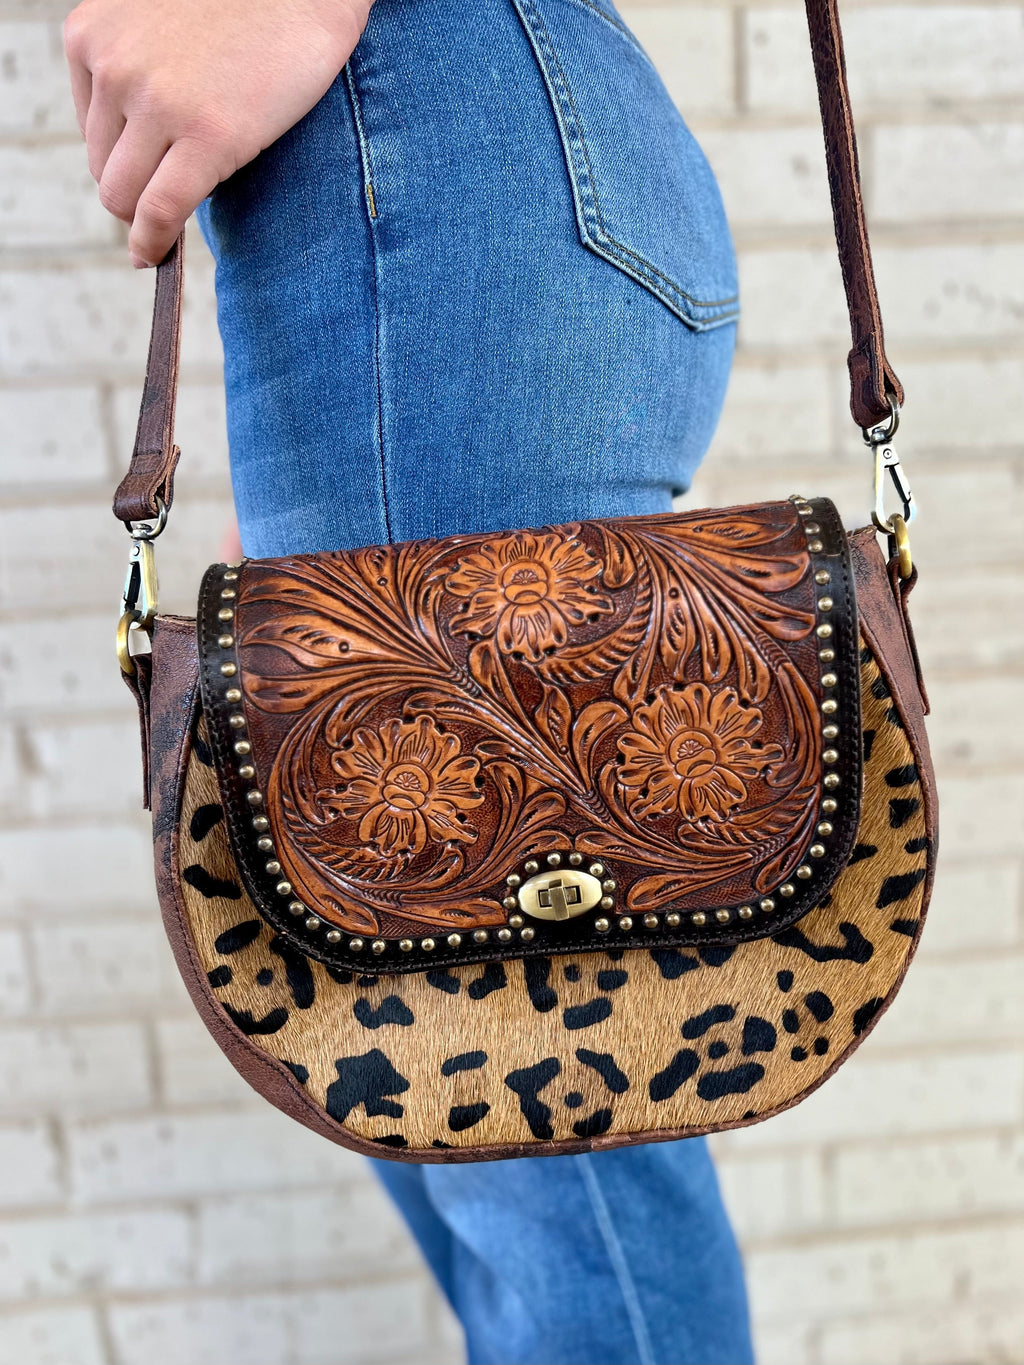 Make a statement with this unique leopard hair on hide bag. Crafted from tooled leather with floral tooled design and small nail head detail, it's as wild as it is stylish. With an adjustable/removeable strap, it can be a shoulder bag or clutch. Ready to hit the plains? Go wild with this must-have bag. 12" X 9" in size